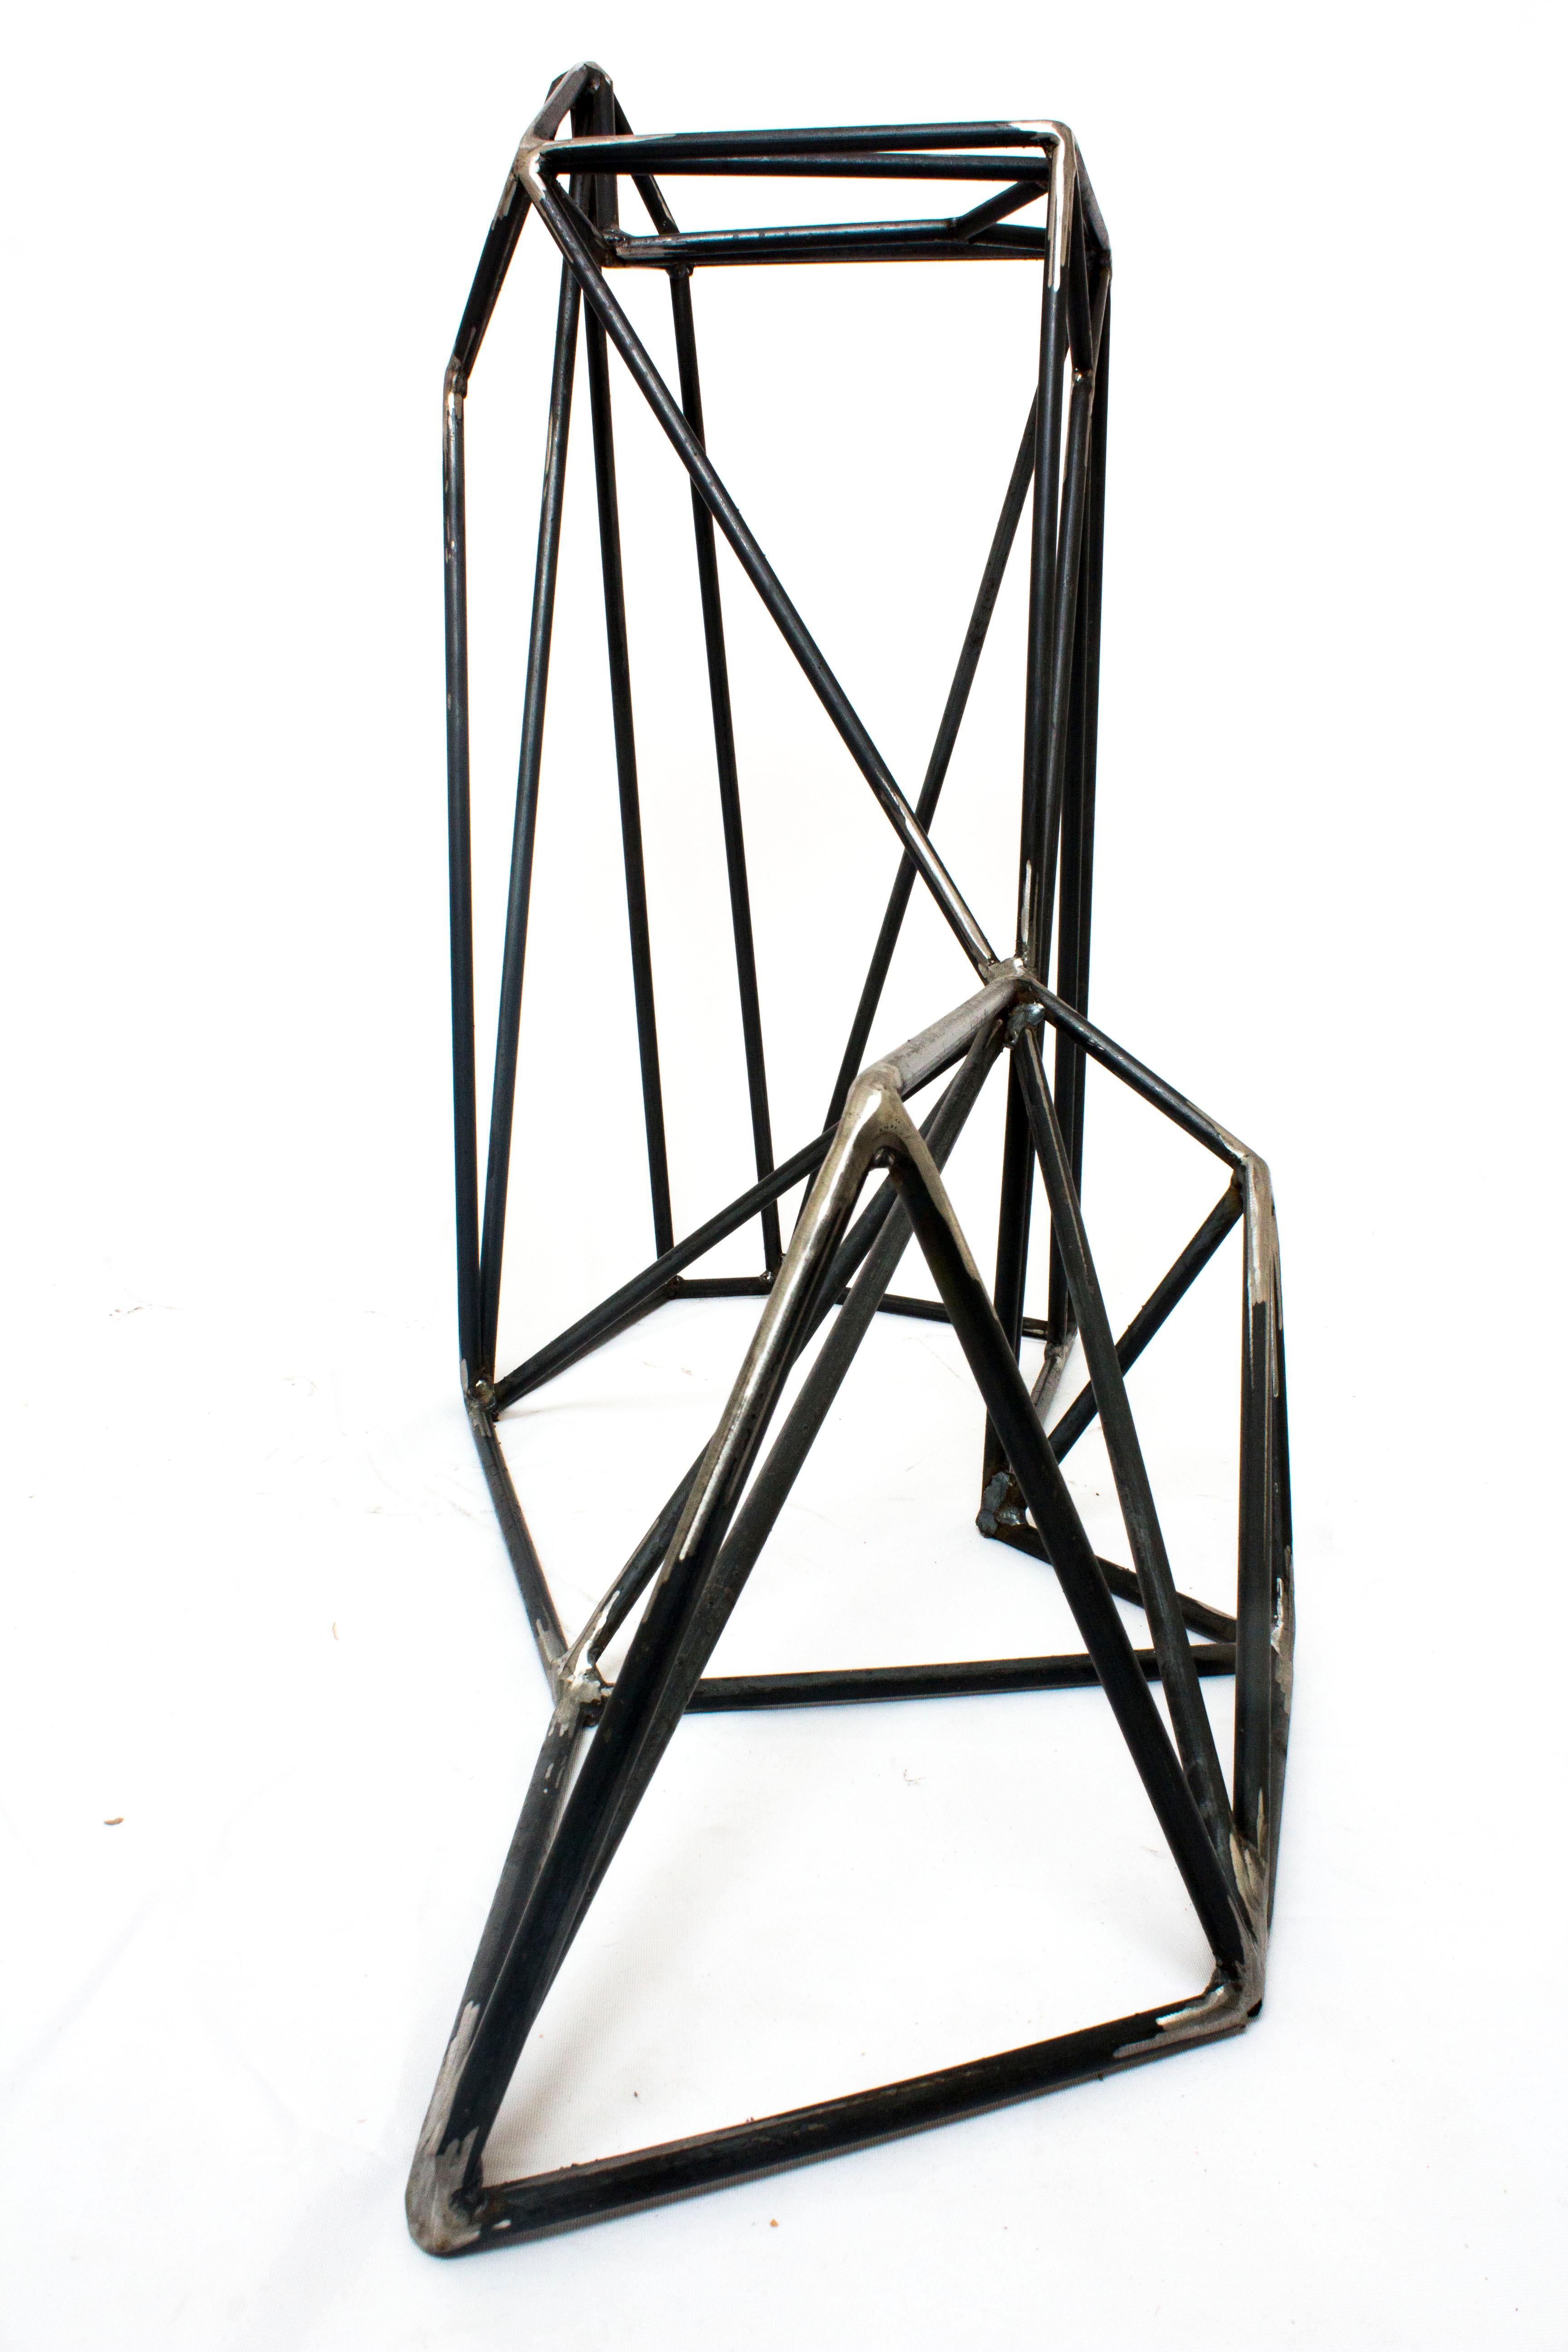 A contemporary polygonal sculpture that can be placed indoors or outdoors in multiple configurations. Fully customizable in terms of materials, finishes, and dimensions.

Overall dimensions as shown are 36